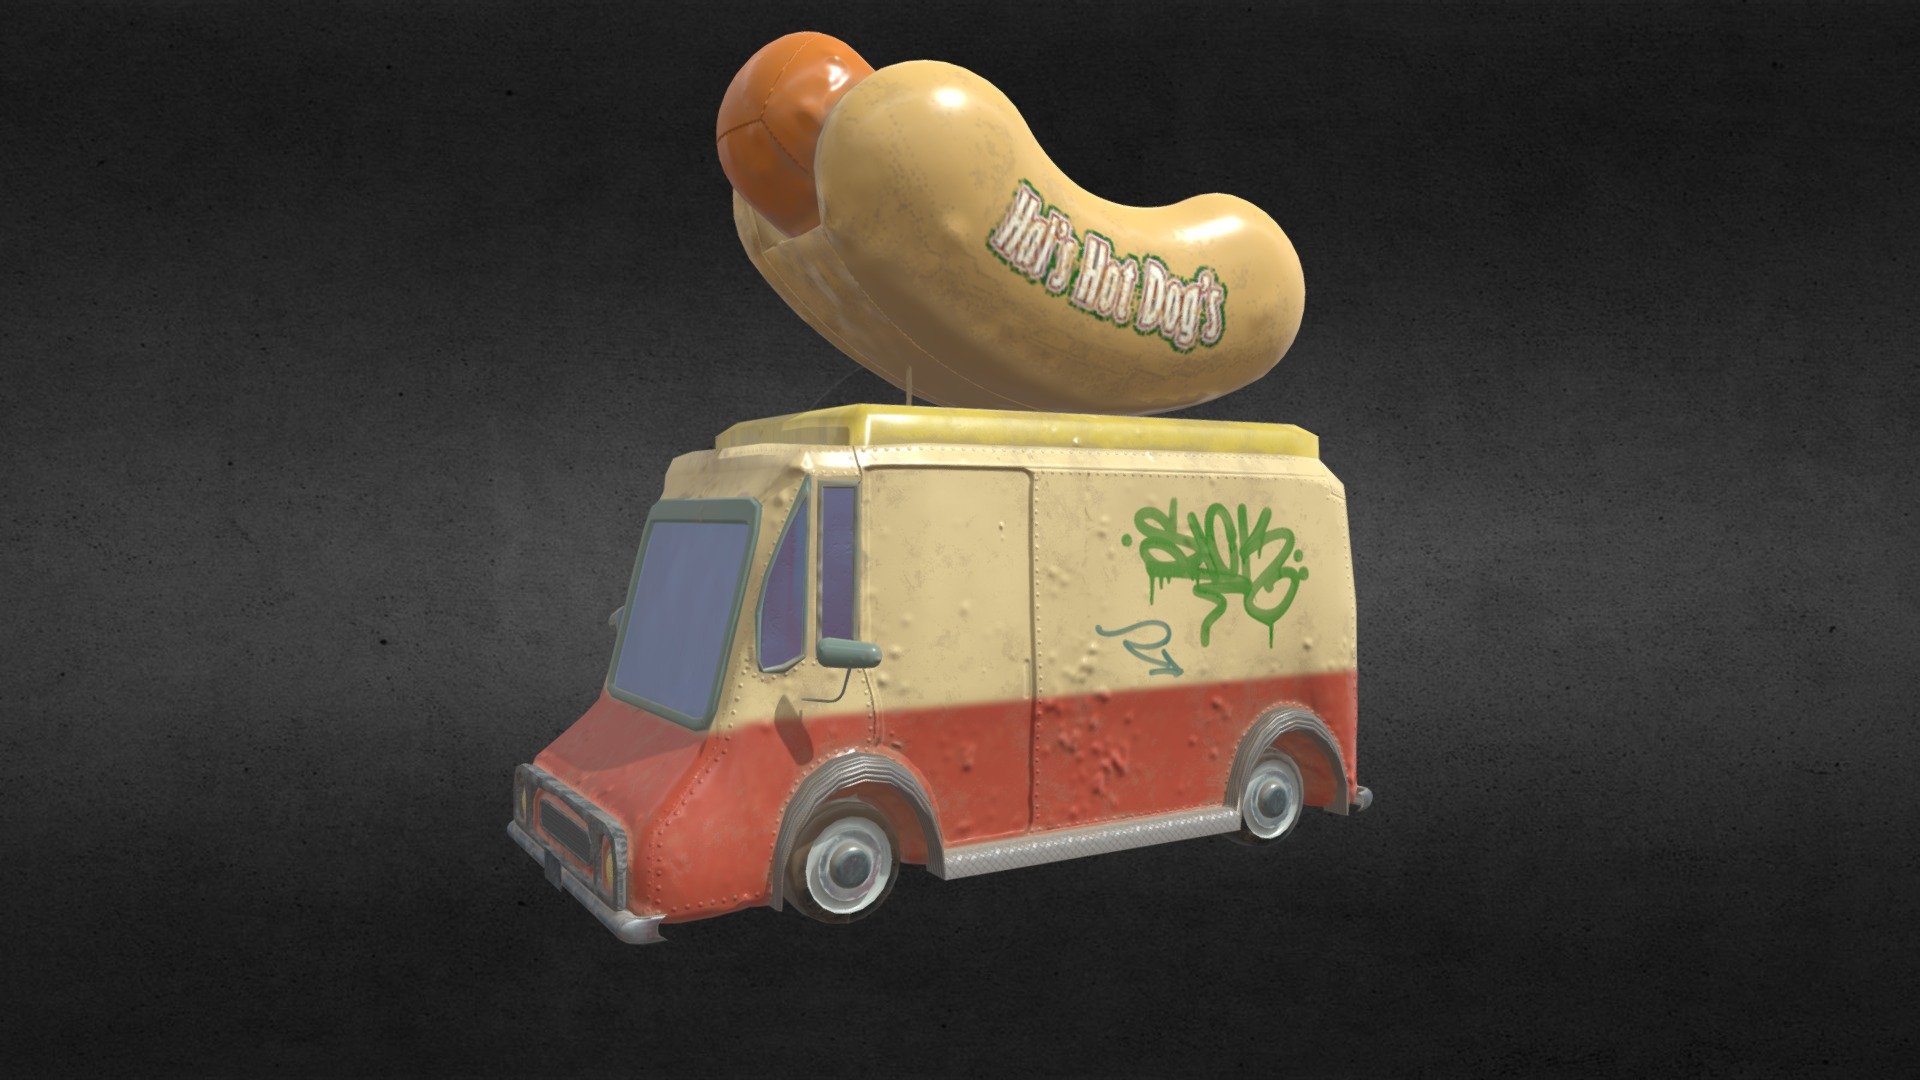 A Low-Poly food stand that sells hot dogs, inspired by overcooked! - Stetz Vehicle - 3D model by KristinStetz 3d model